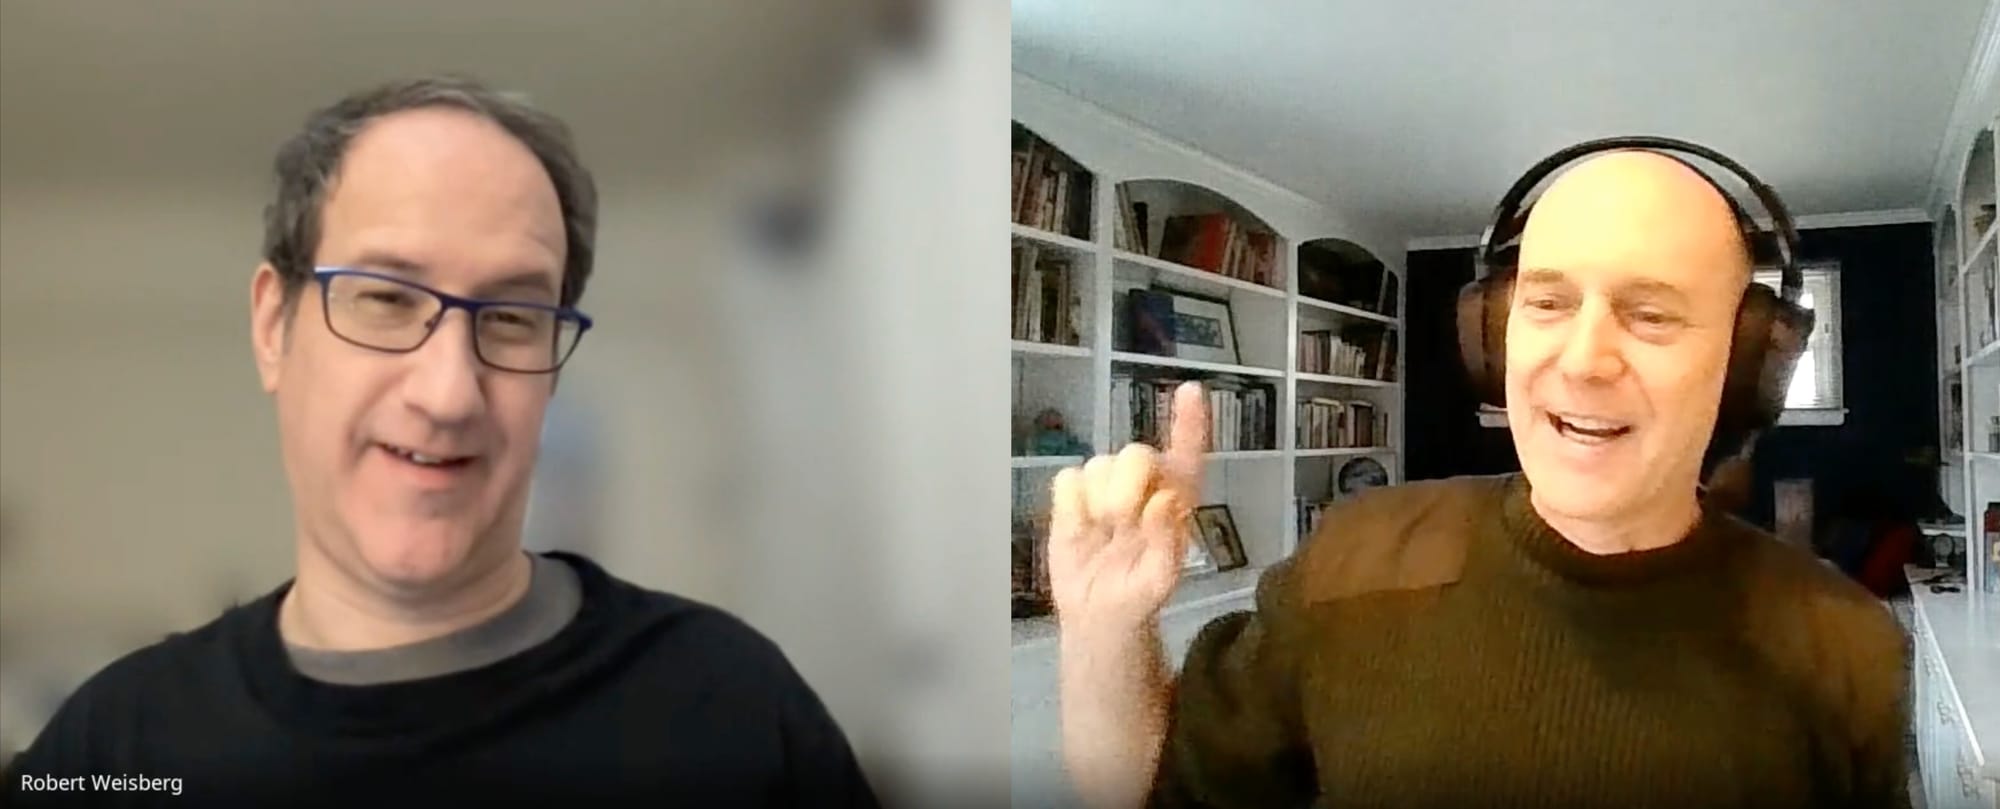 two men speaking in a split-screen image from an online video call